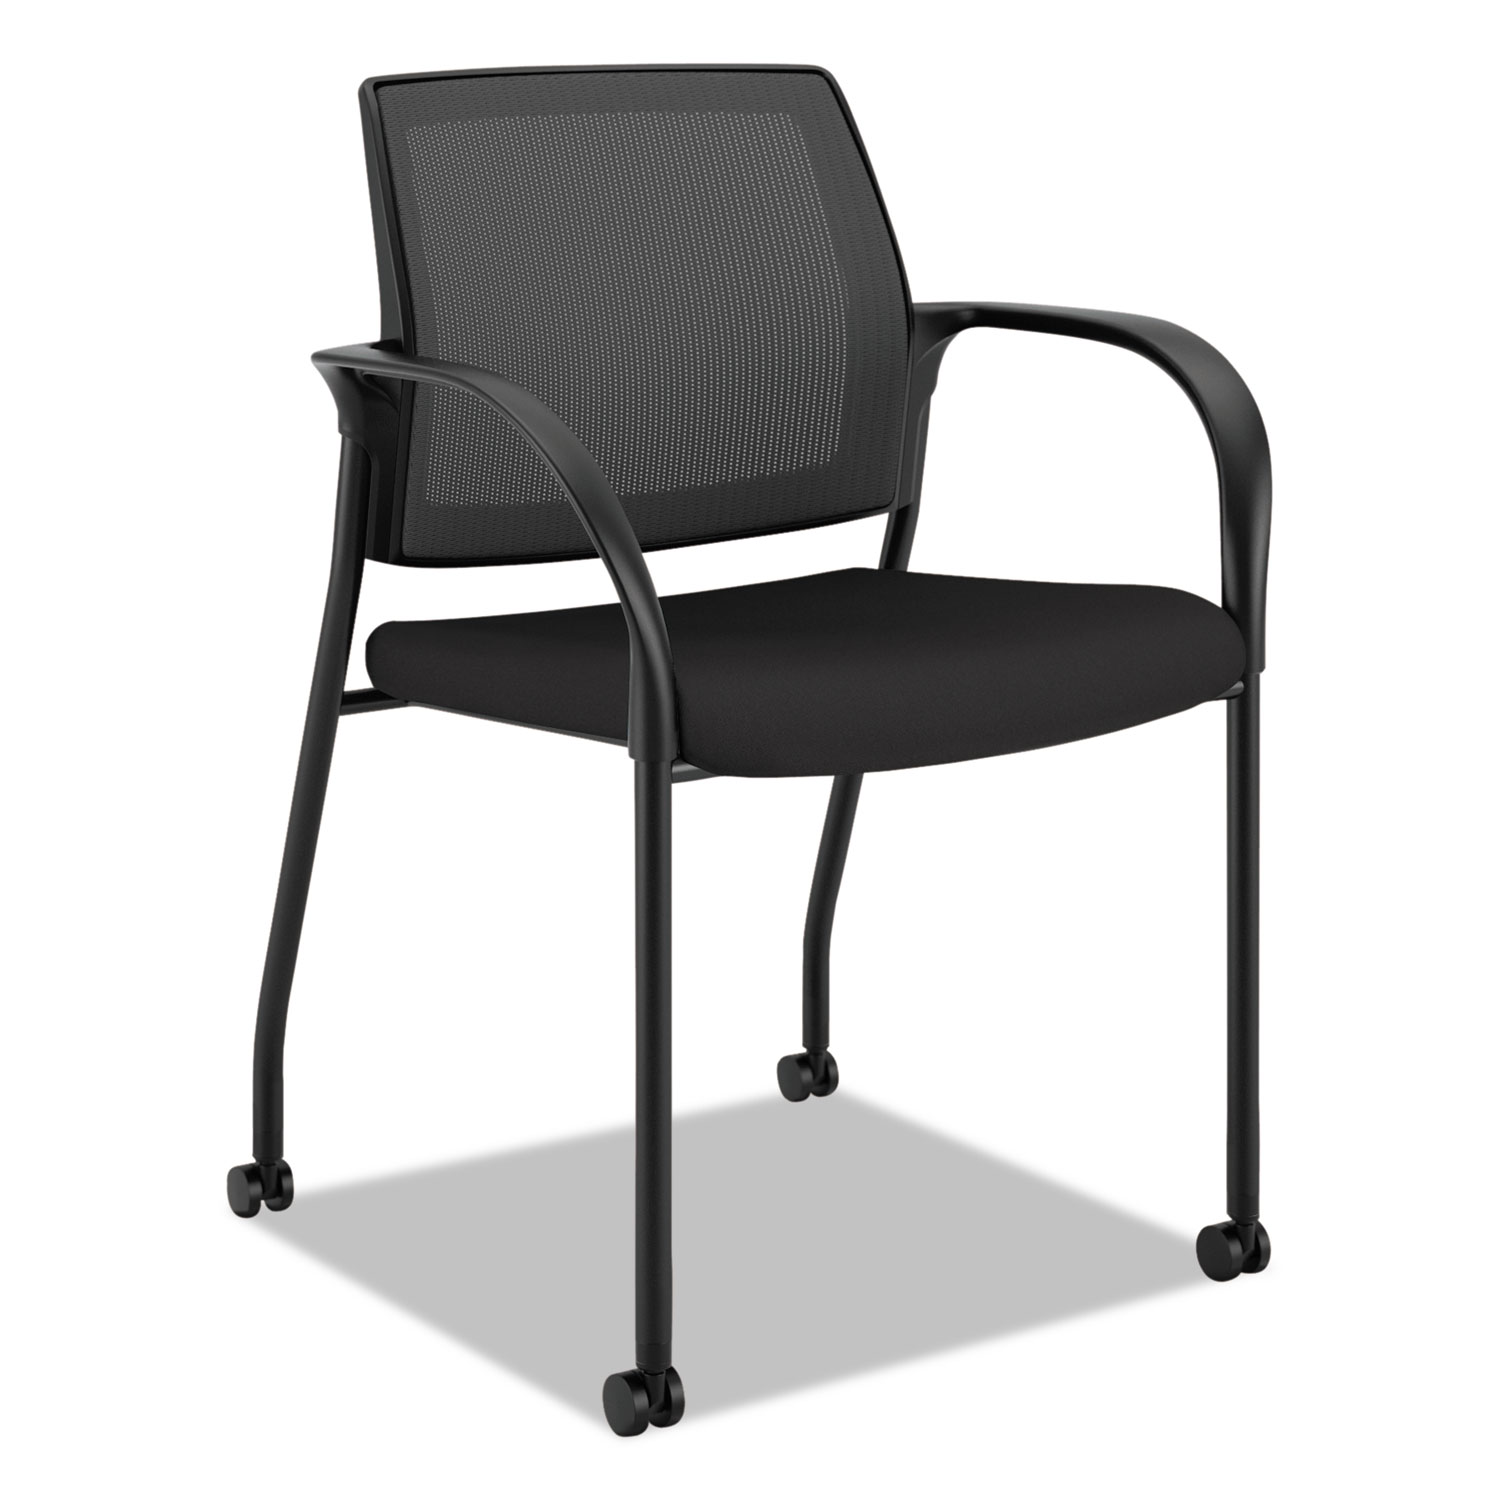 Ignition 2.0 Ilira-Stretch Mesh Back Mobile Stacking Chair, Black Fabric